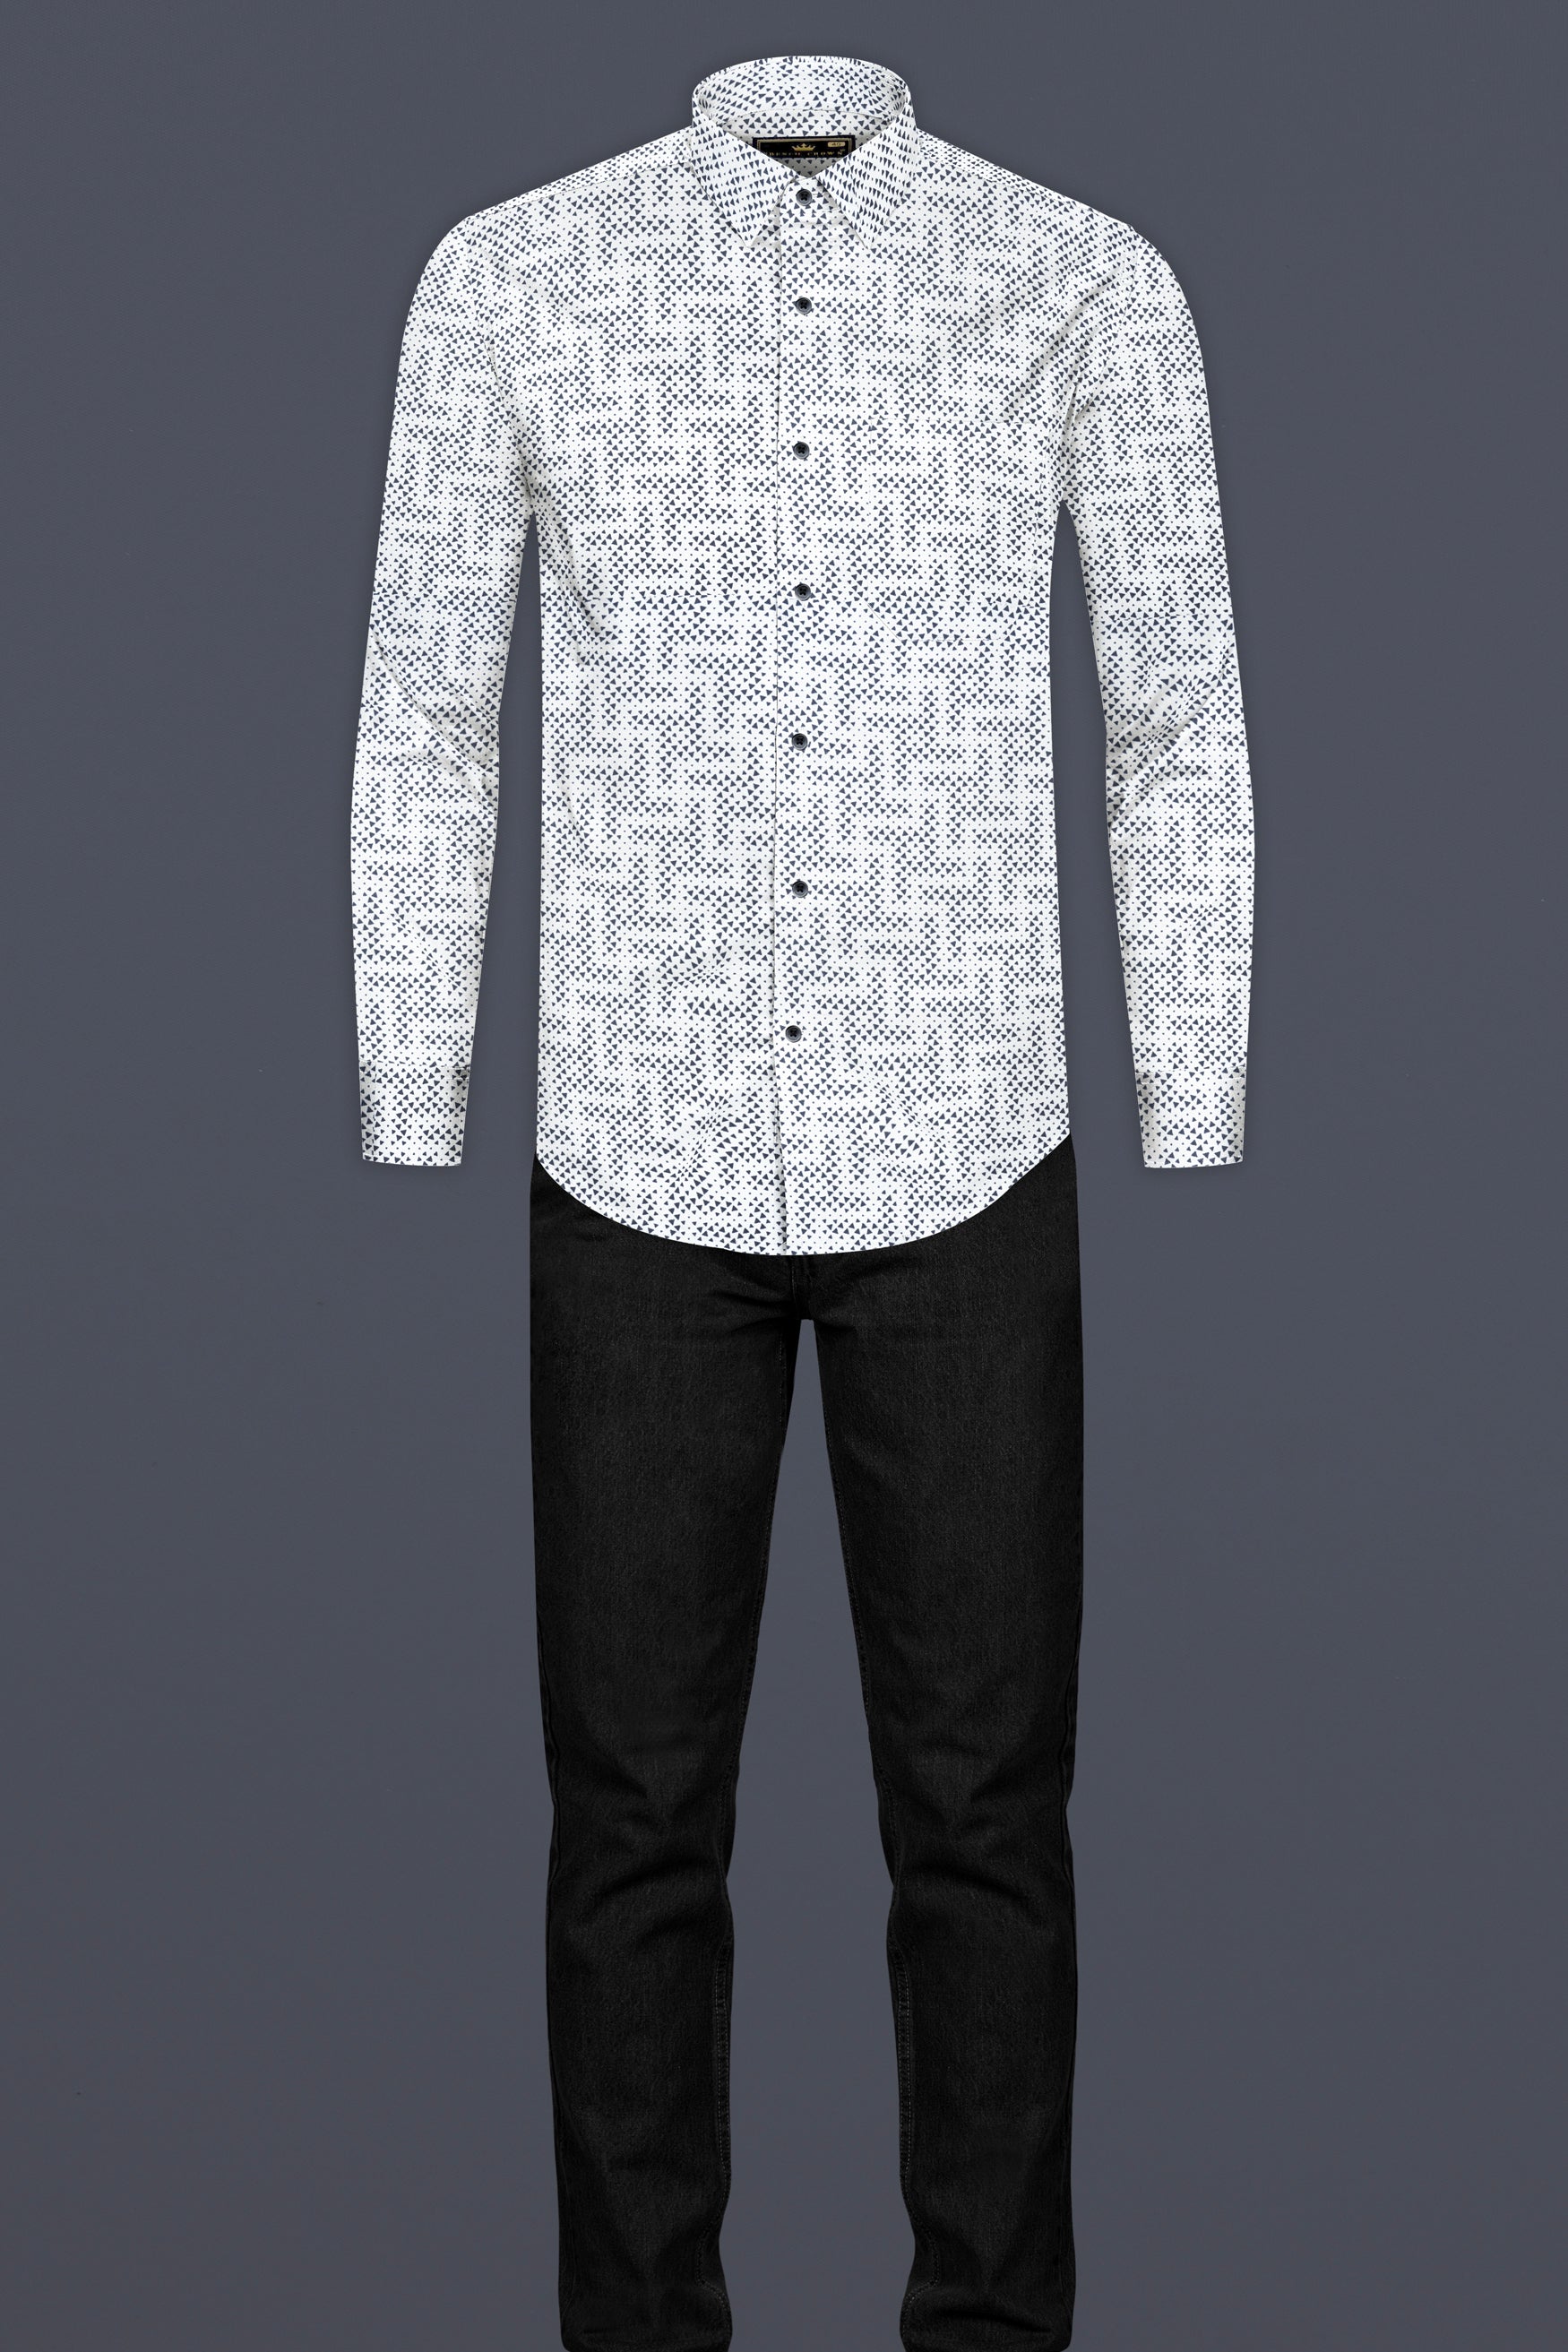 Classic White with Black Flocked Triangle Printed Super Soft Premium Cotton Shirt